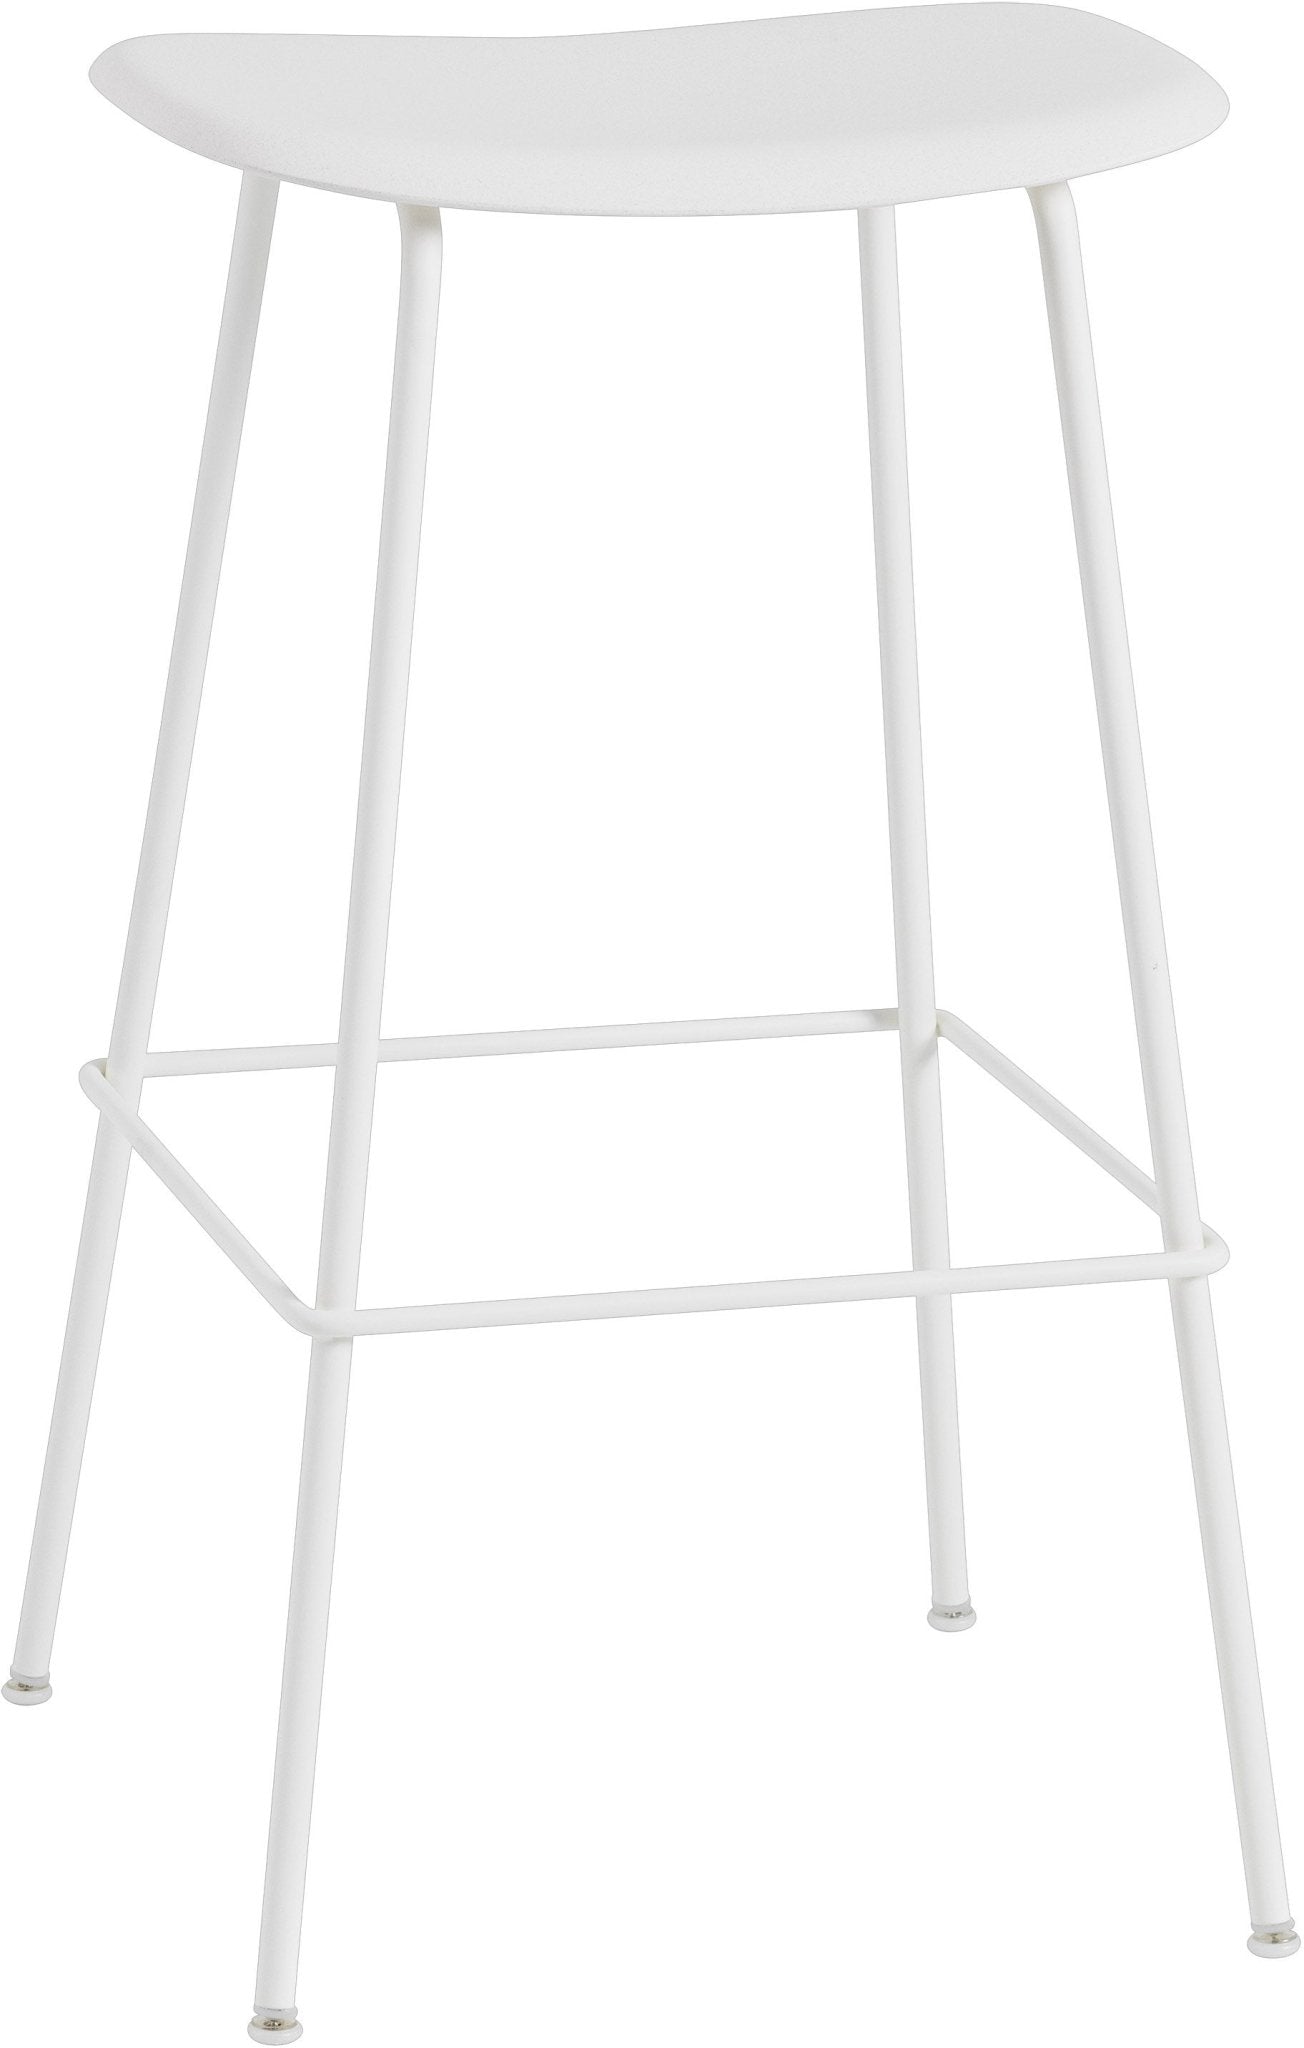 Fiber Stool Without Back - Wire Base - White Seat & White Base / Bar Height